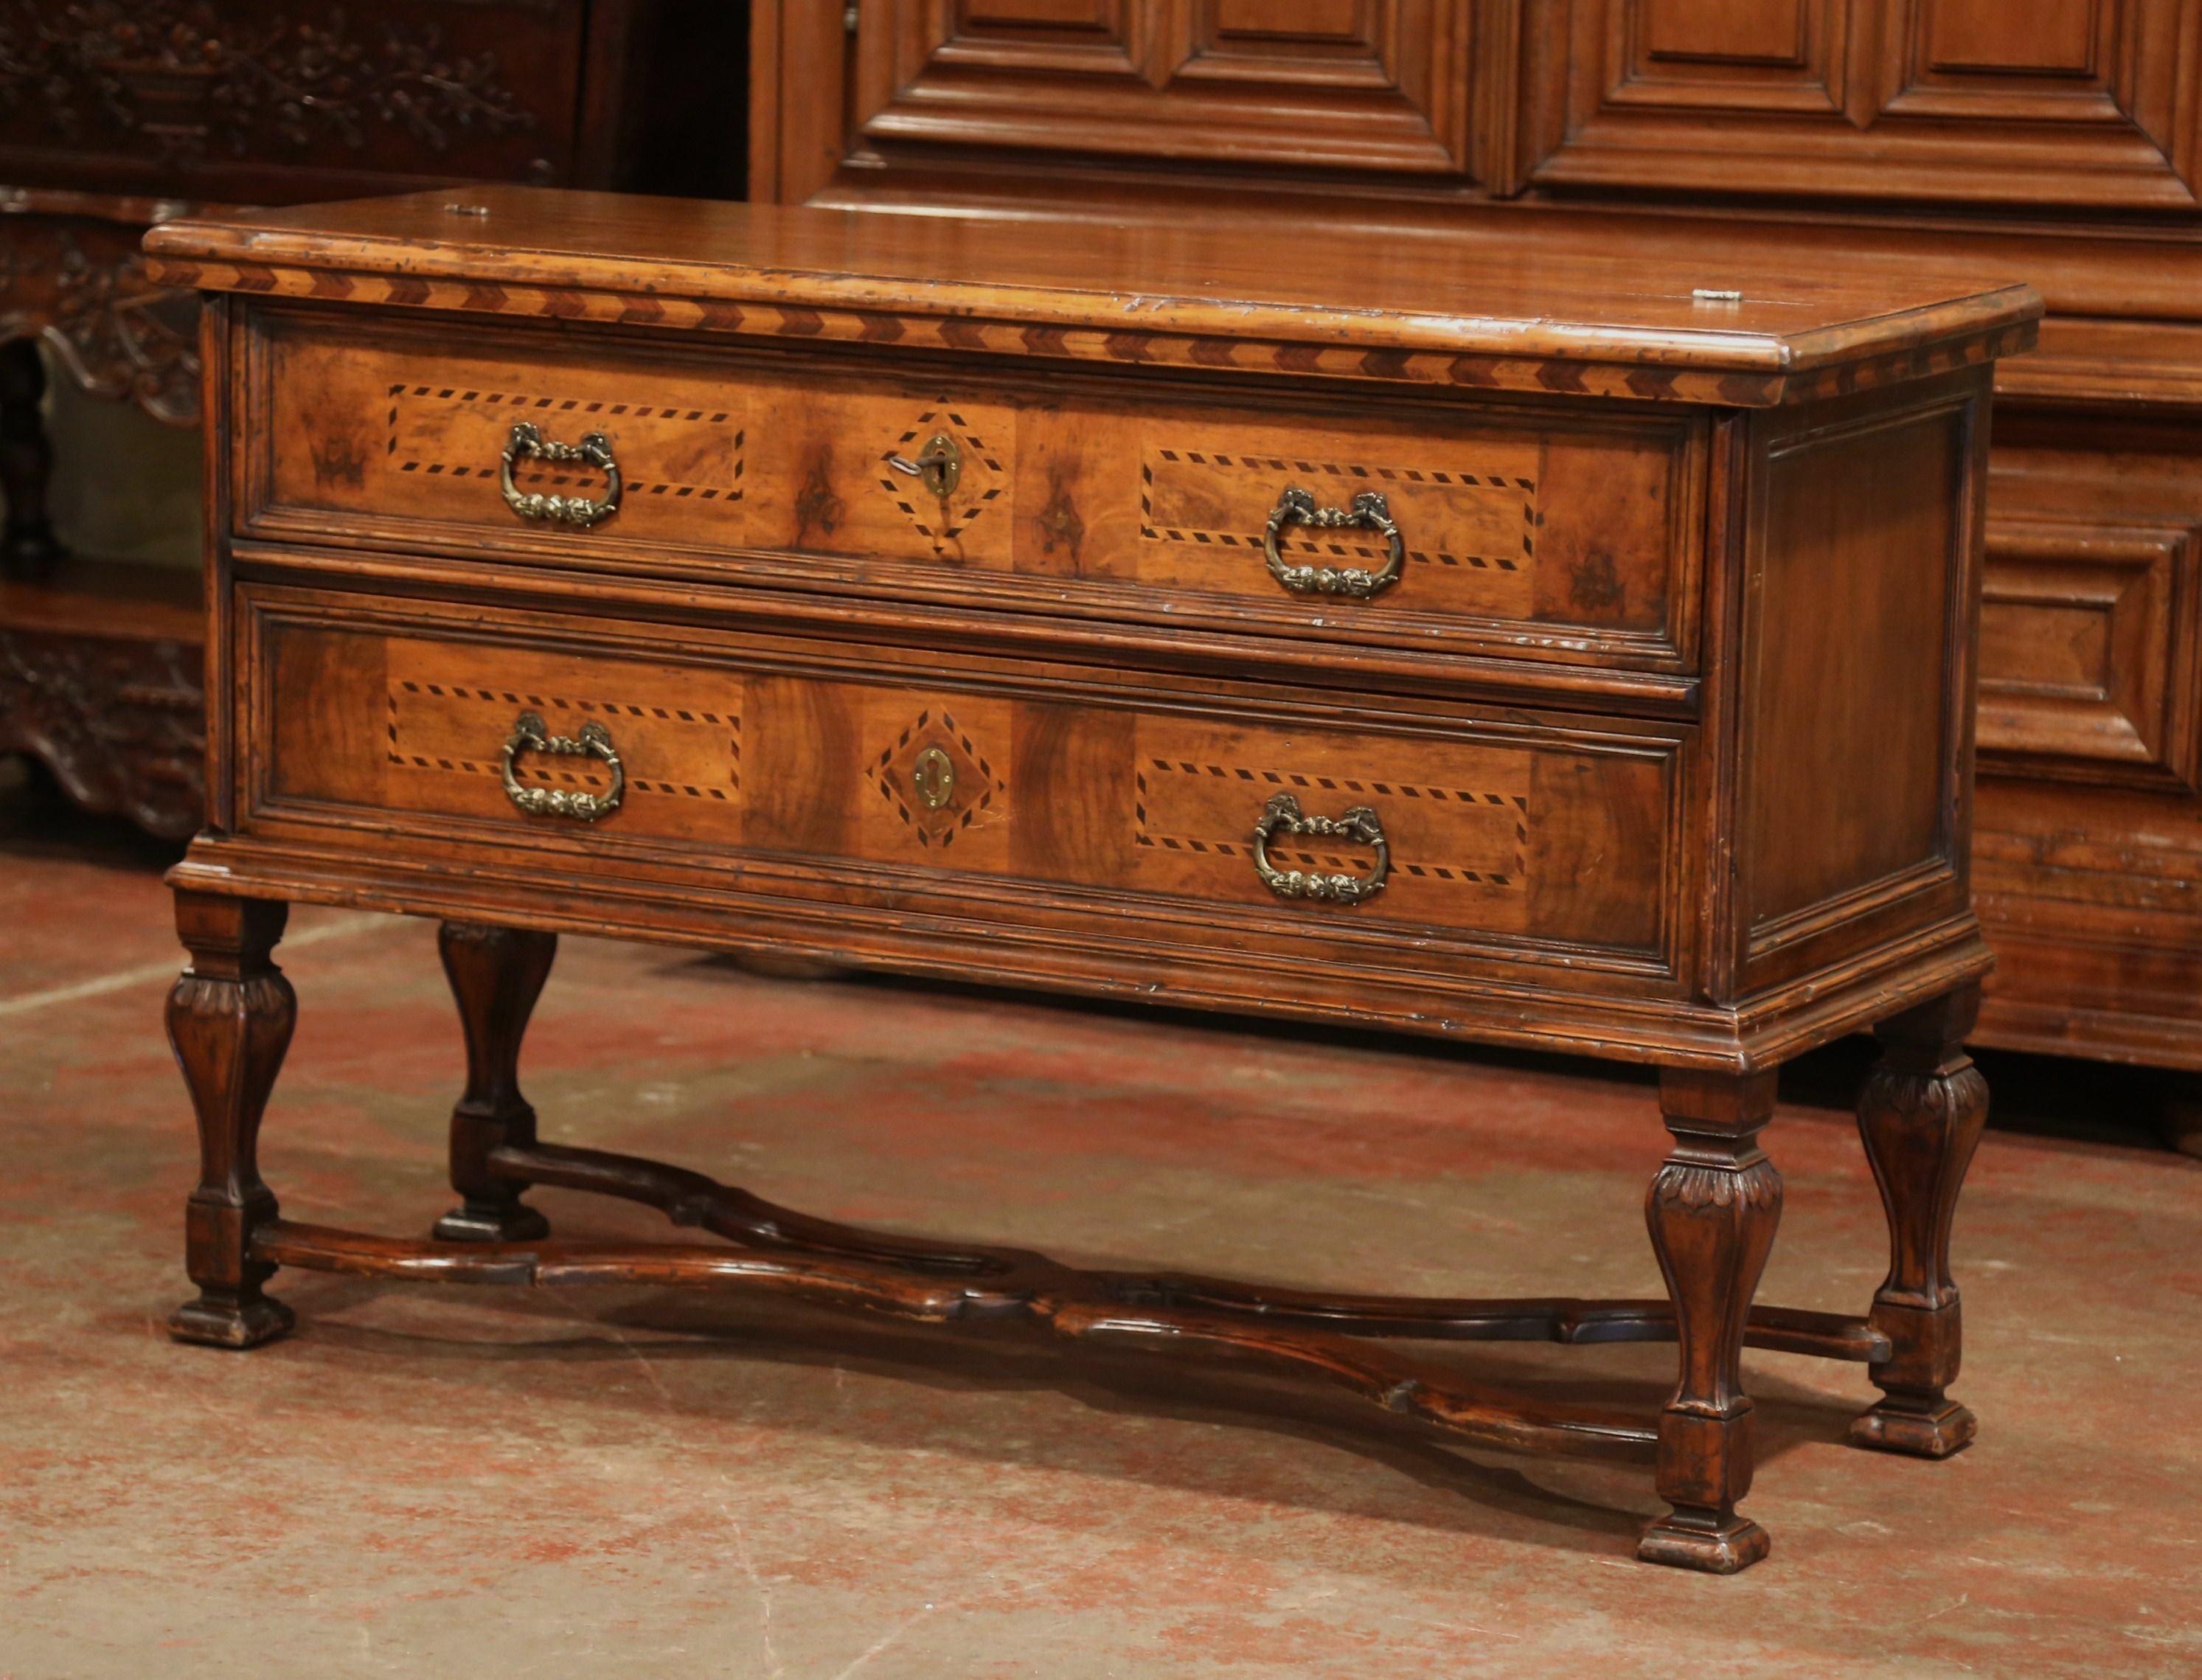 This elegant, multi-function fruitwood chest was created in Italy, circa 1930. The complex walnut cabinet sits on four carved legs embellished over a decorative bottom stretcher; the commode features what appears to be two drawers with marquetry